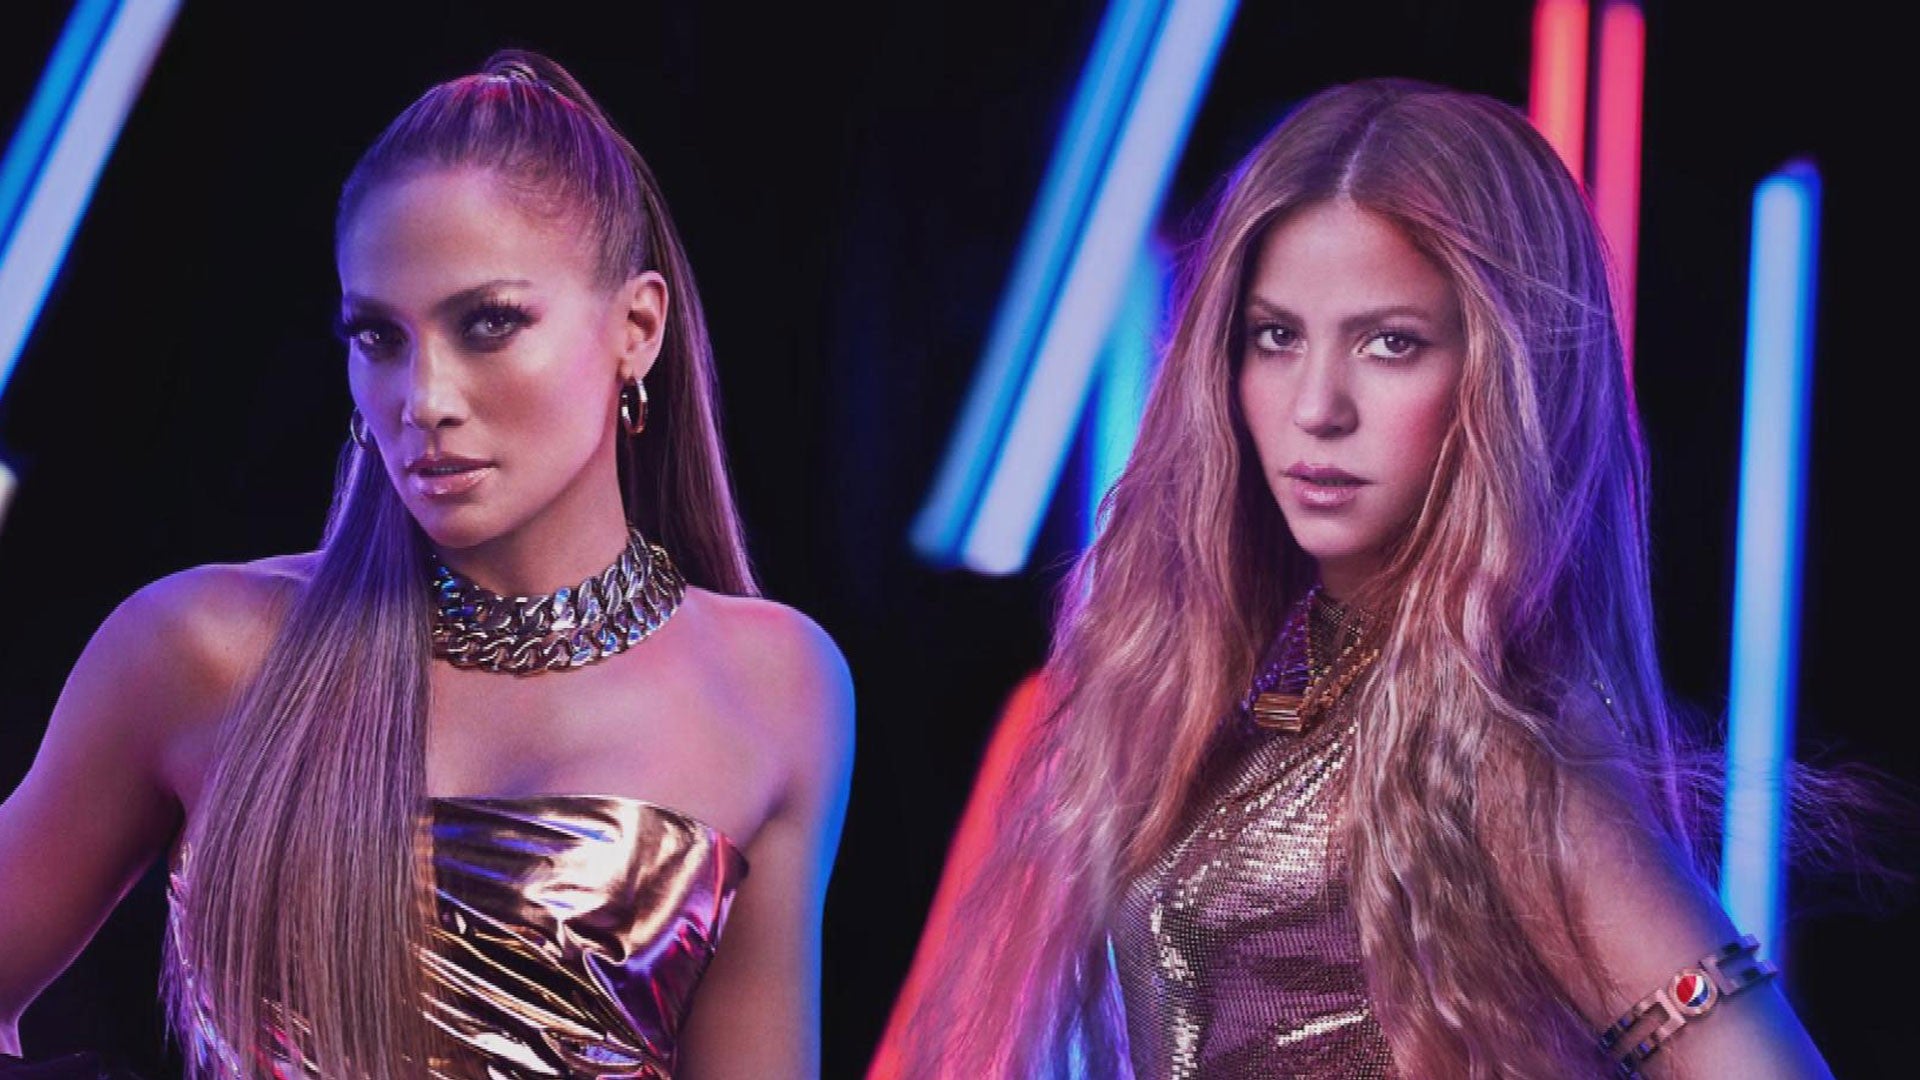 Shakira and Jennifer Lopez Open Up About Their Super Bowl 2020